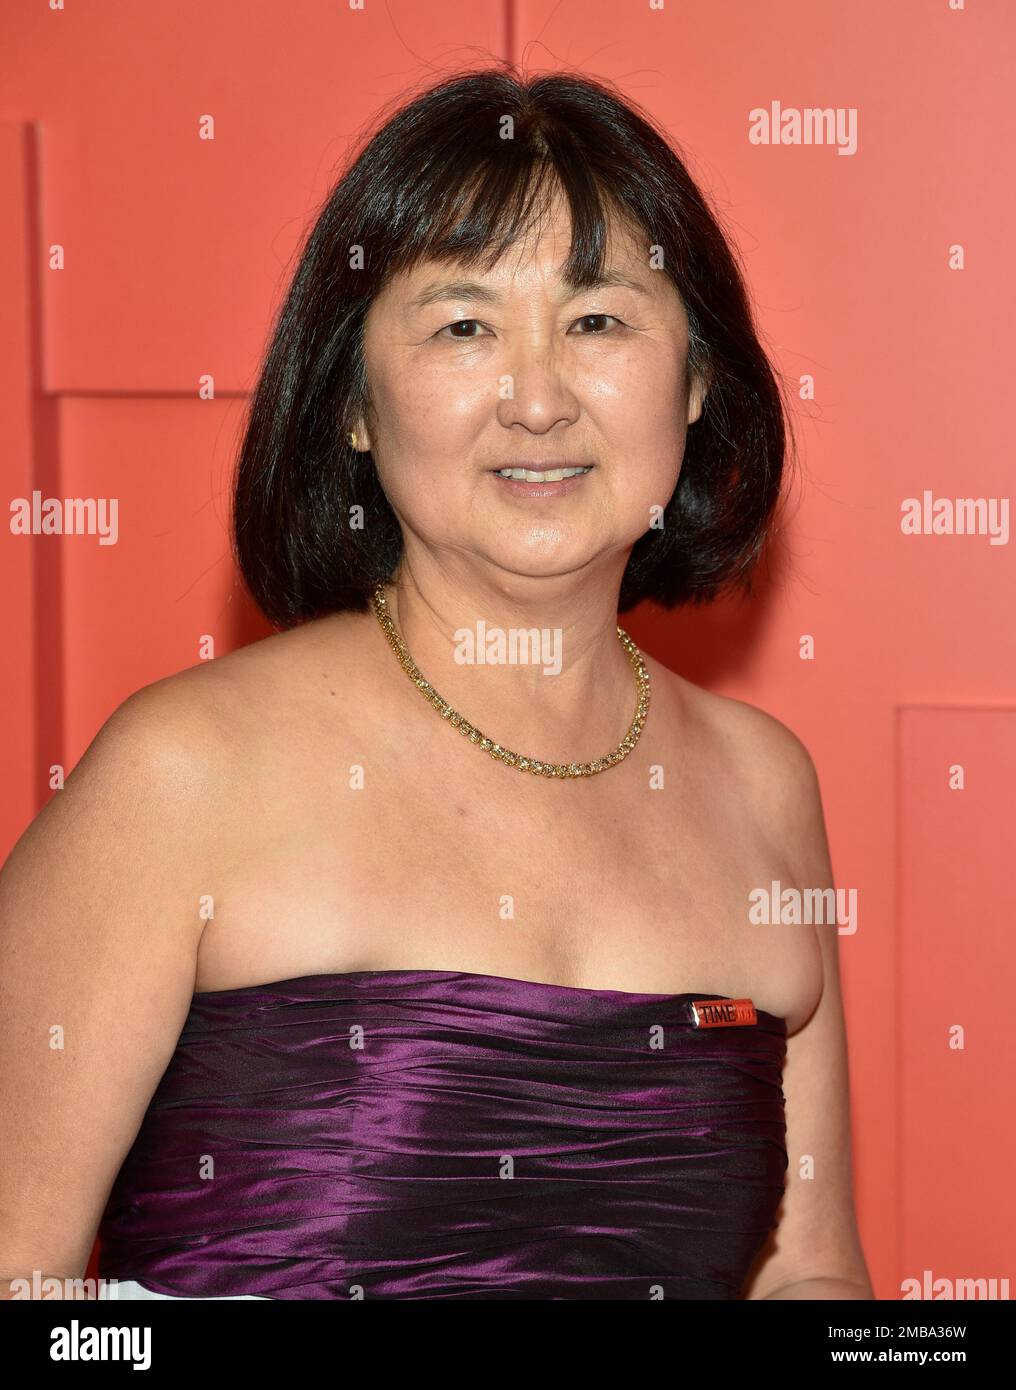 Maya Lin Is on the 2022 TIME 100 List